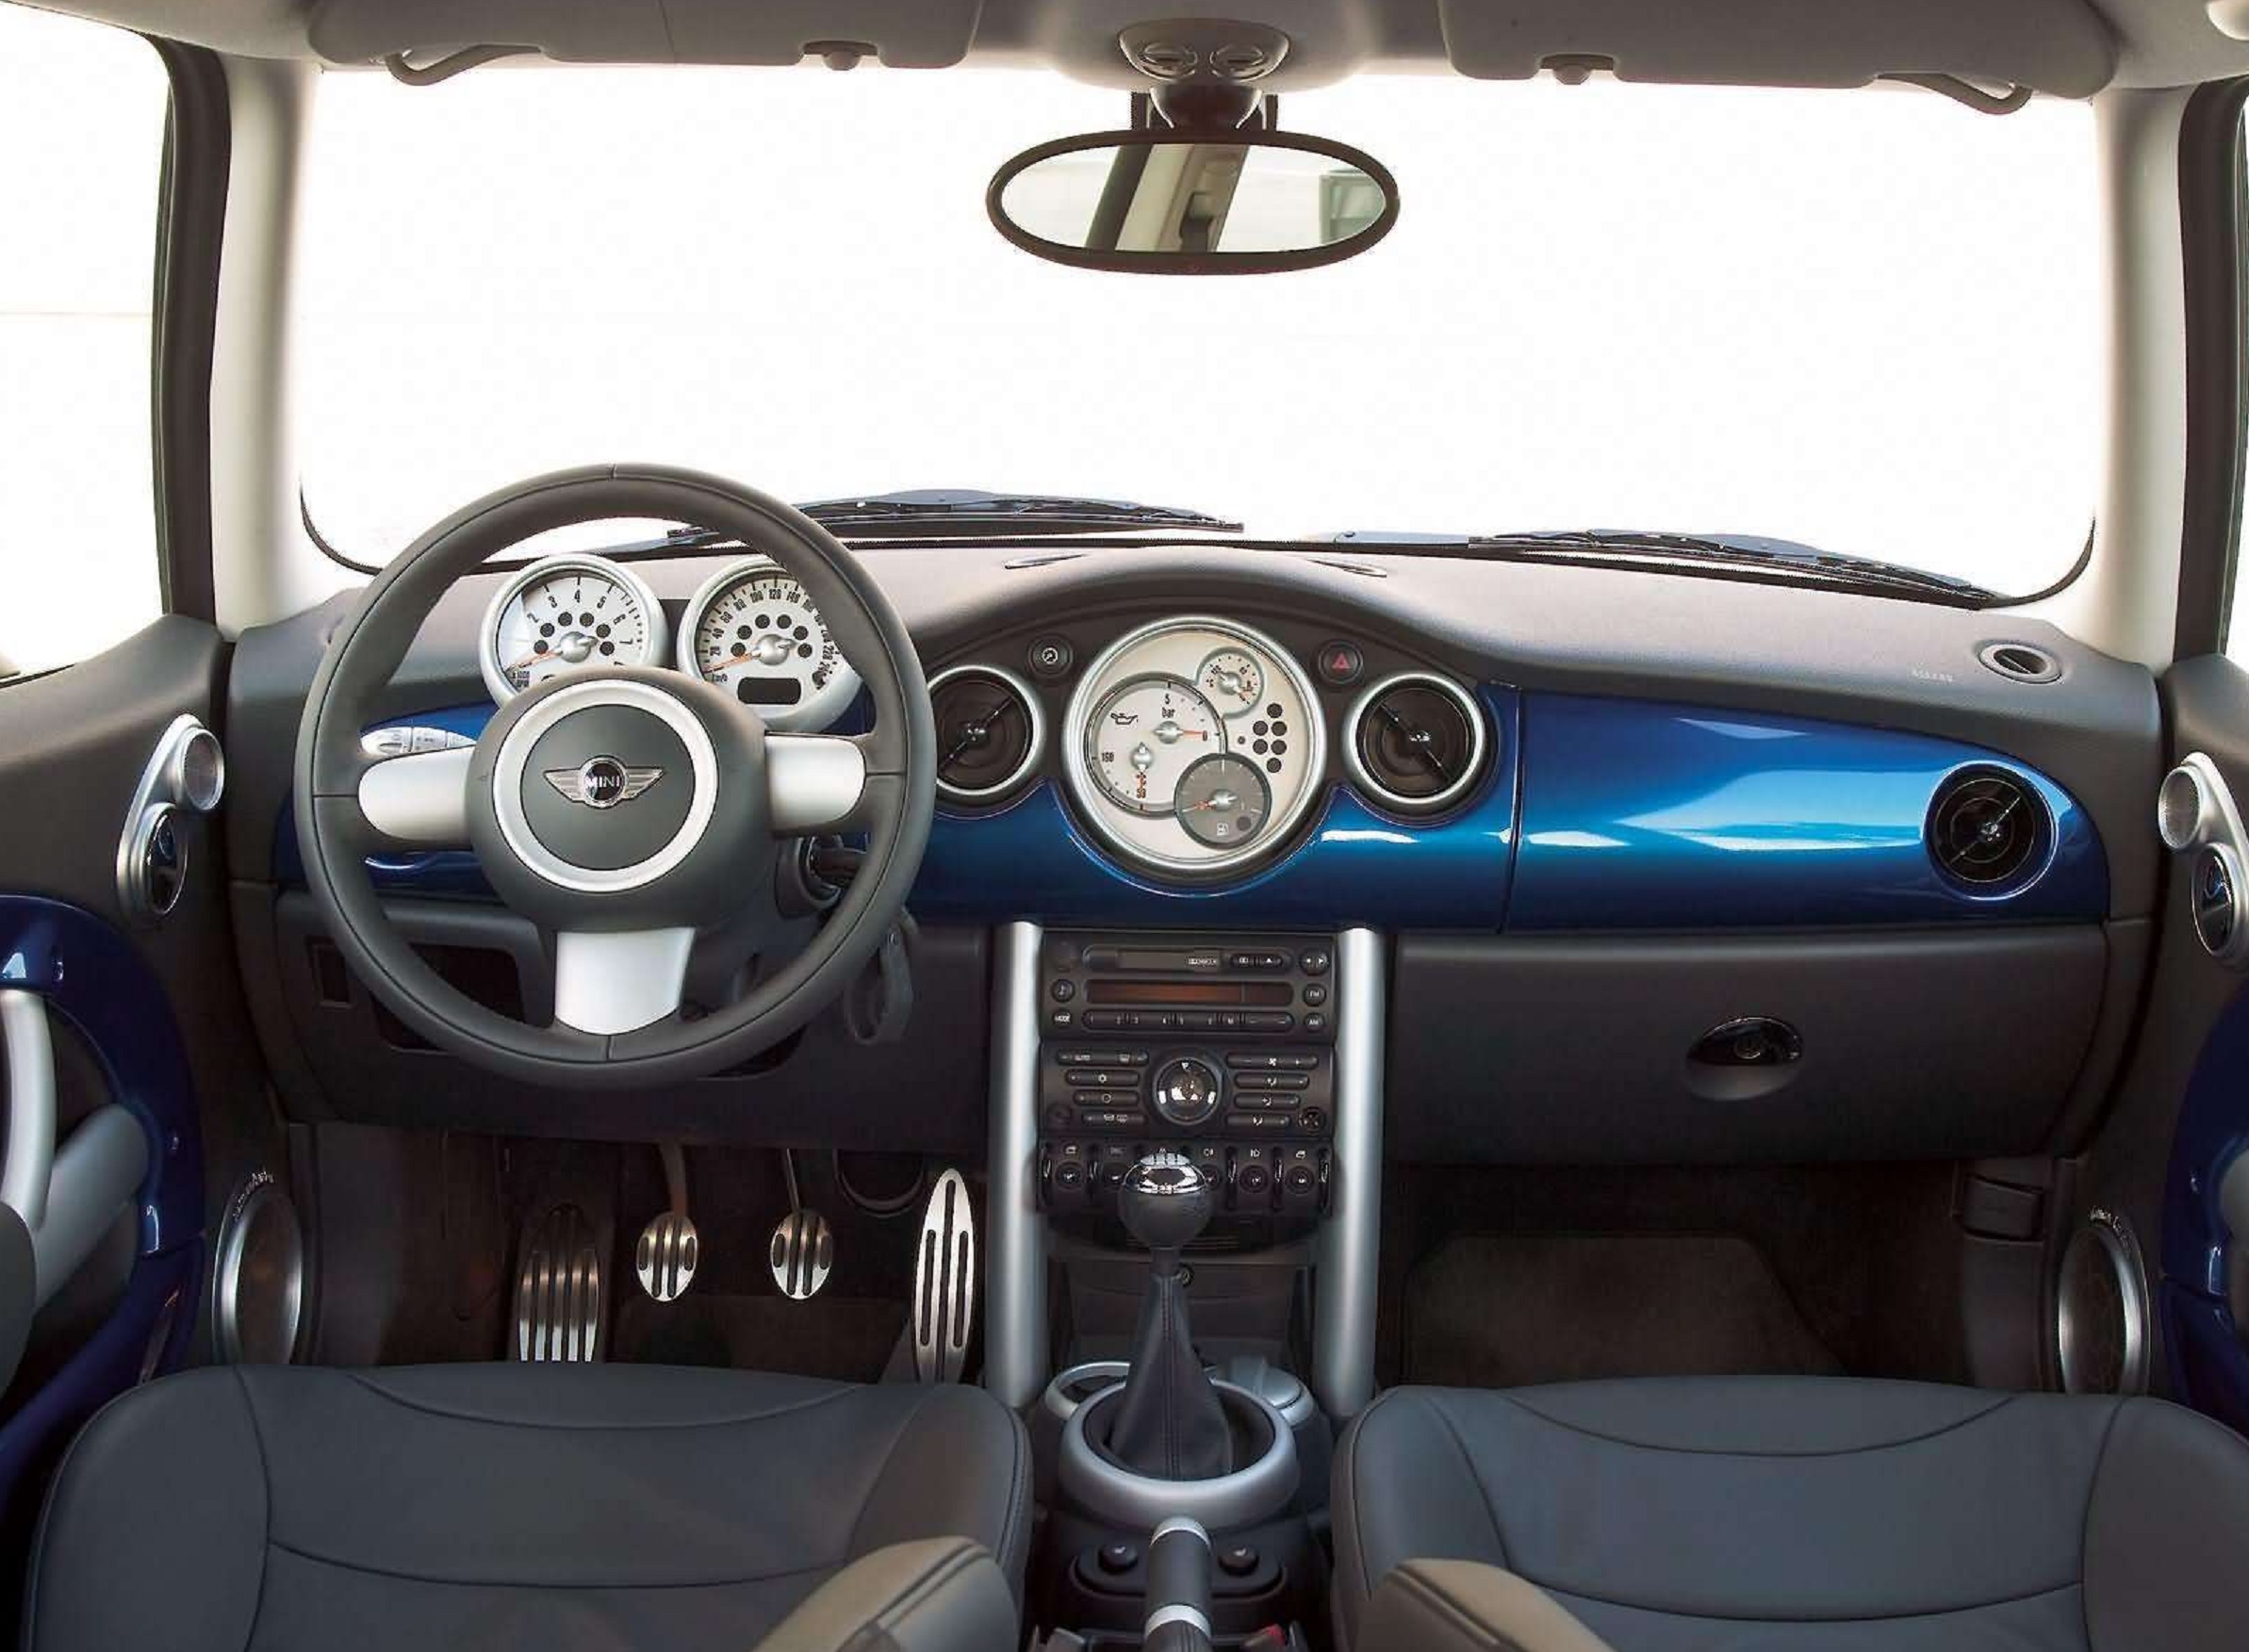 The front seats and blue dashboard of a 2005 R53 Mini Cooper S